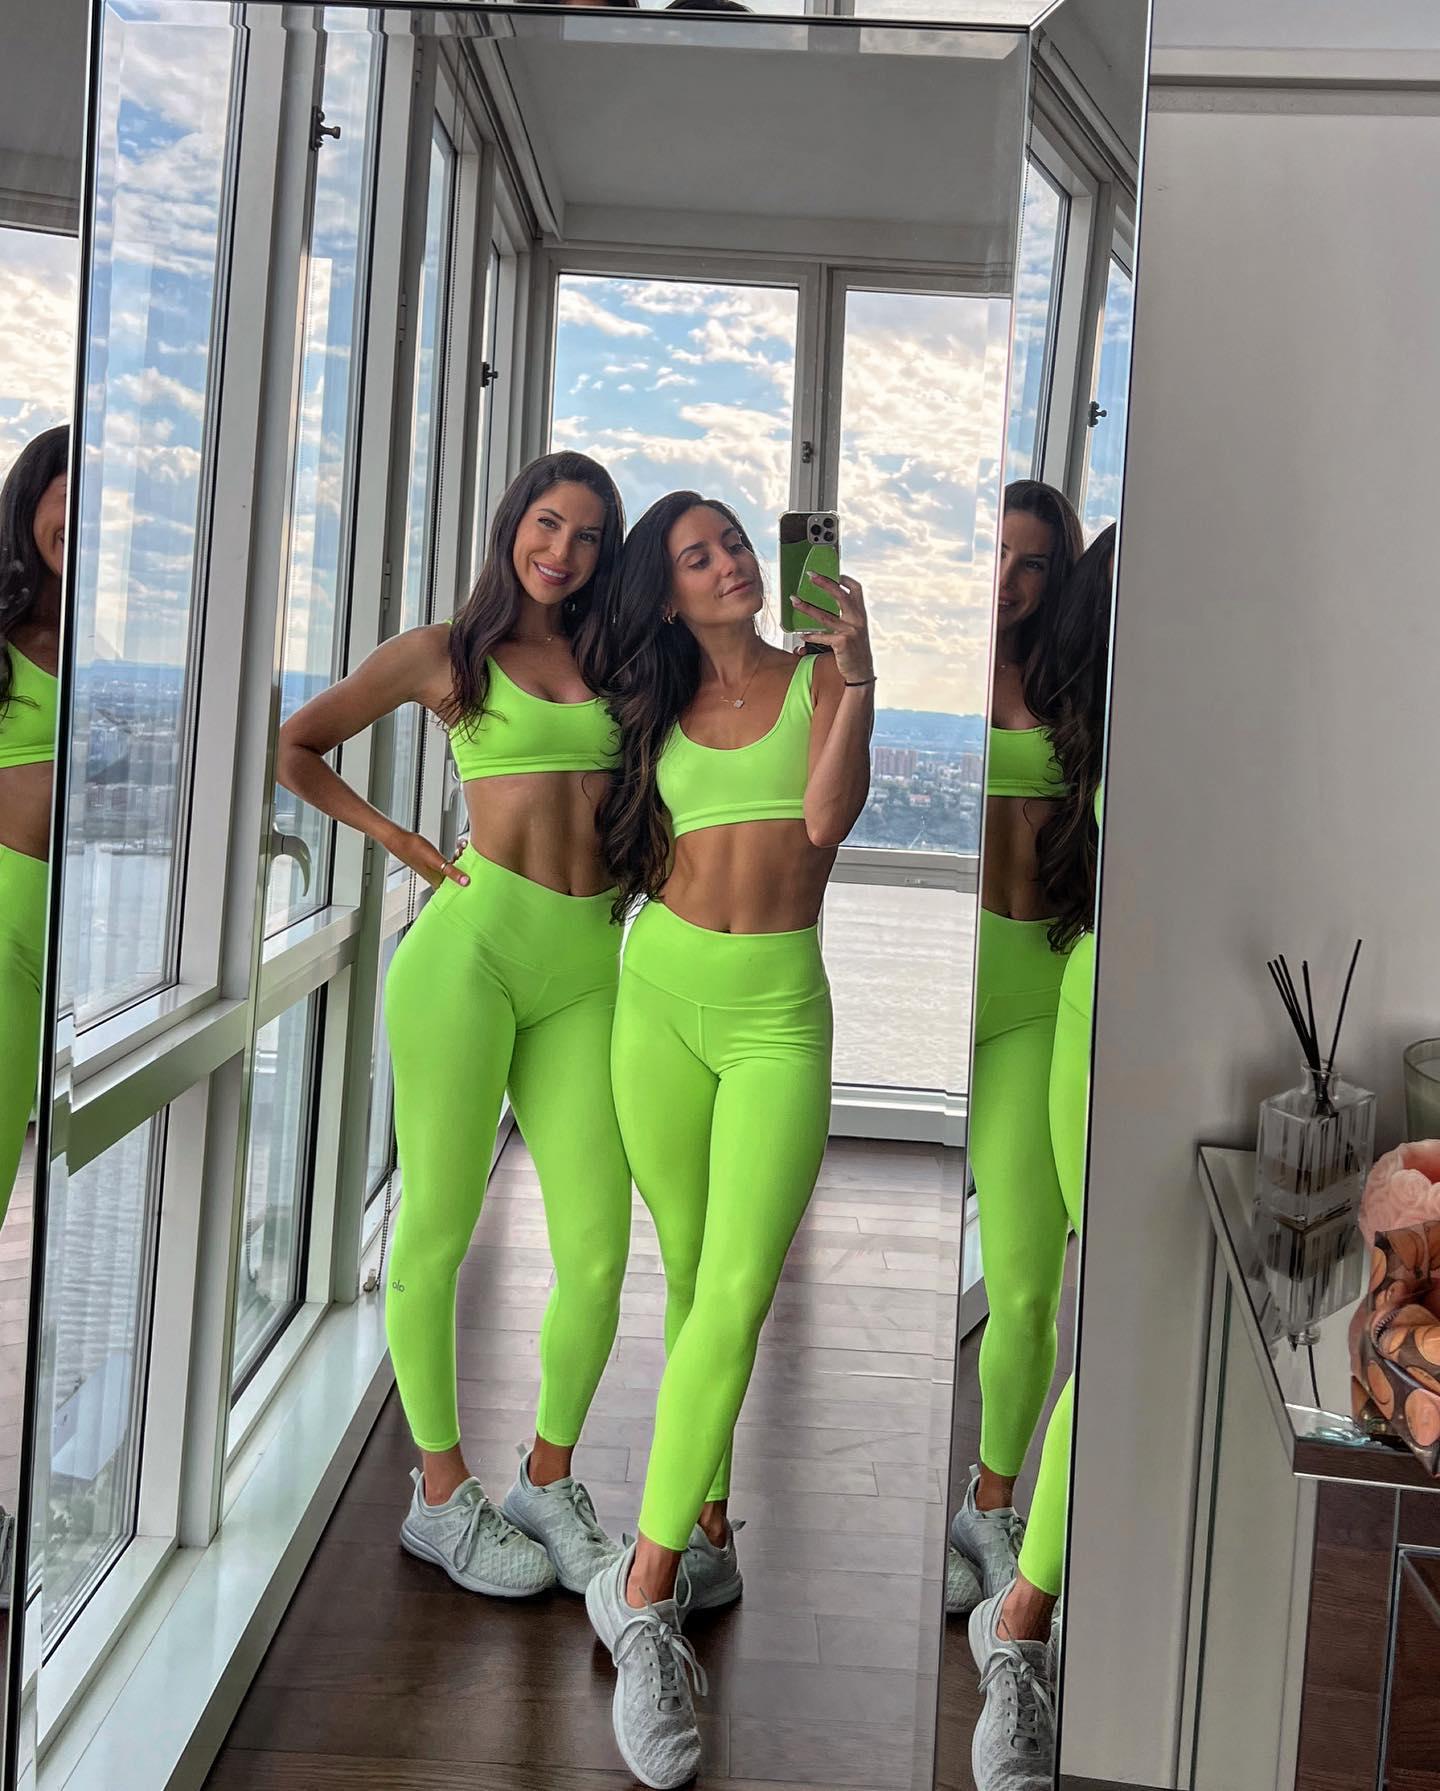 Jen Selter tries to create a new workout challenge with Brianna Joy